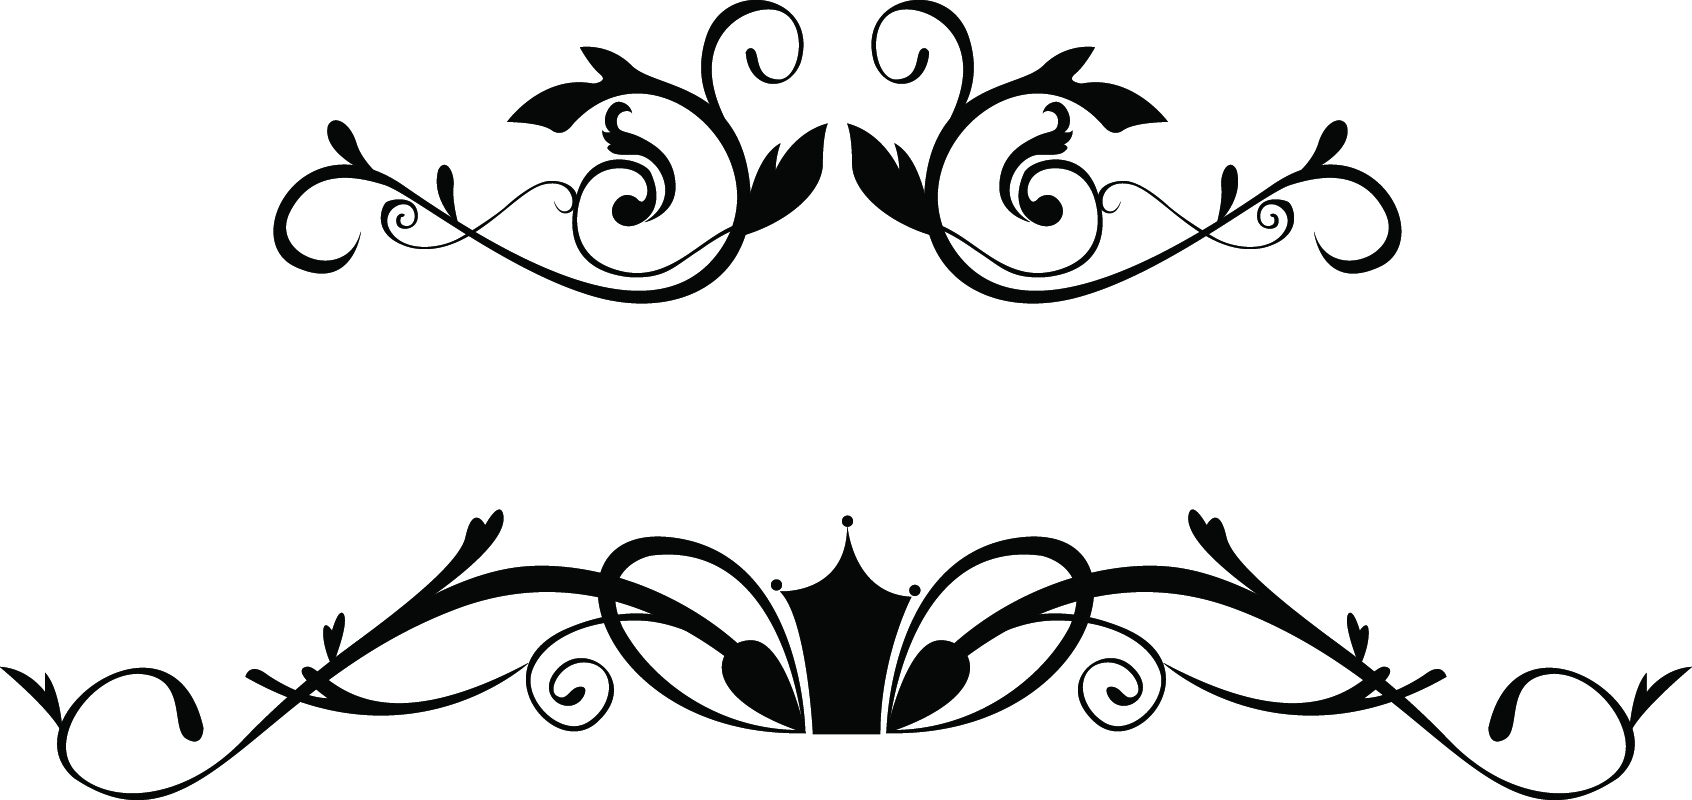 Floral Ornaments (.eps) Free Vector Download - 3axis.co